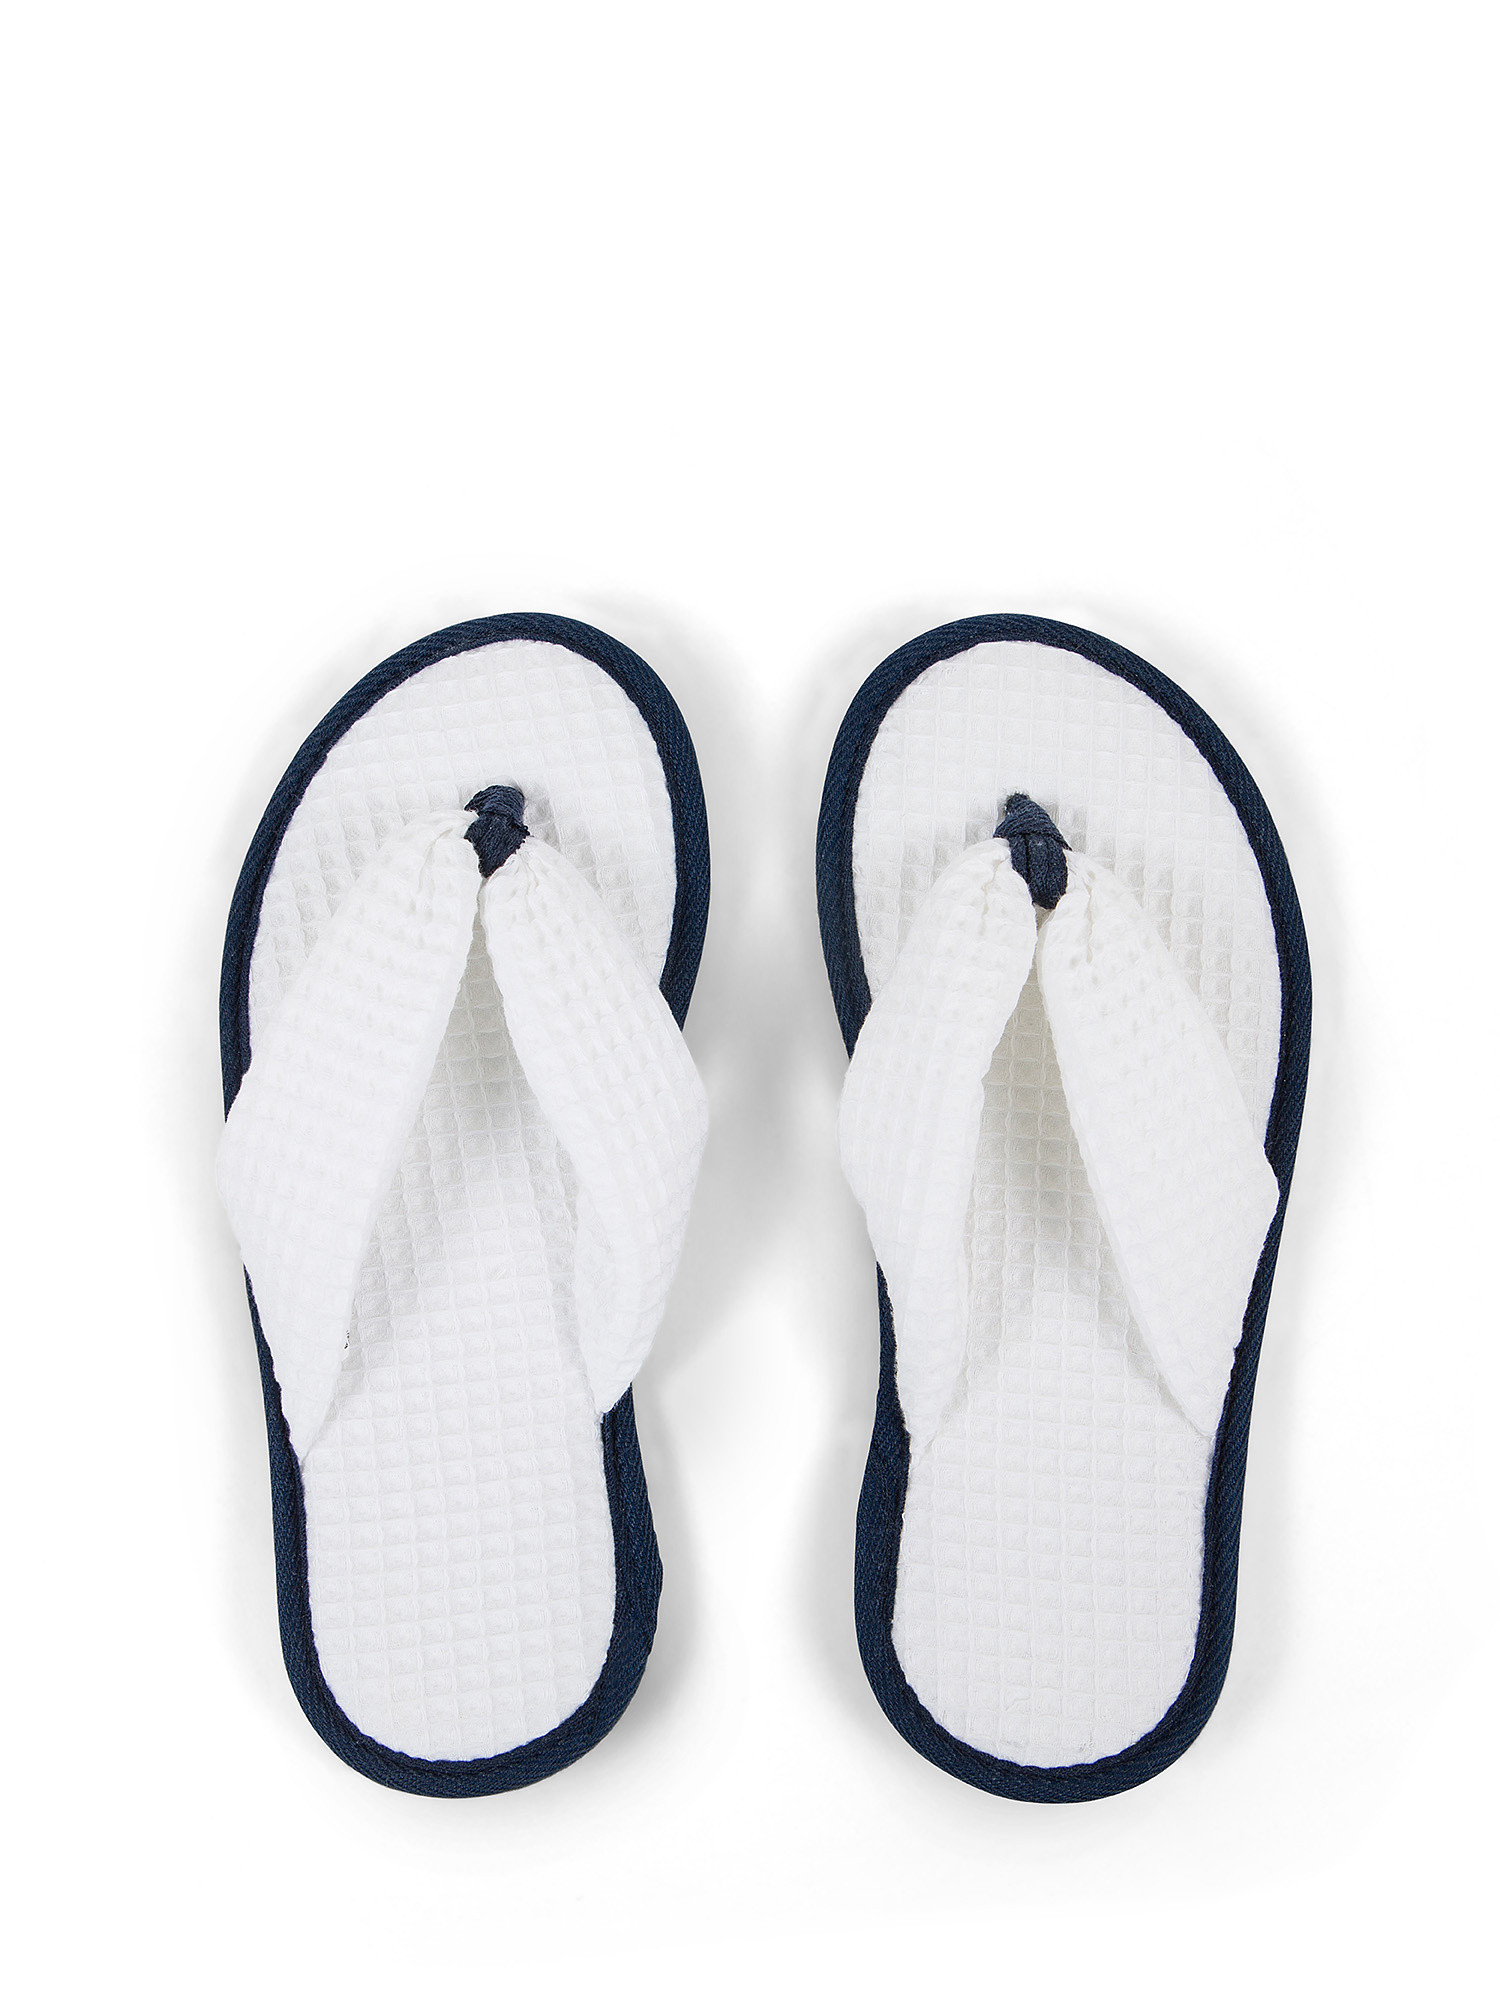 Cotton pique slippers, White, large image number 0